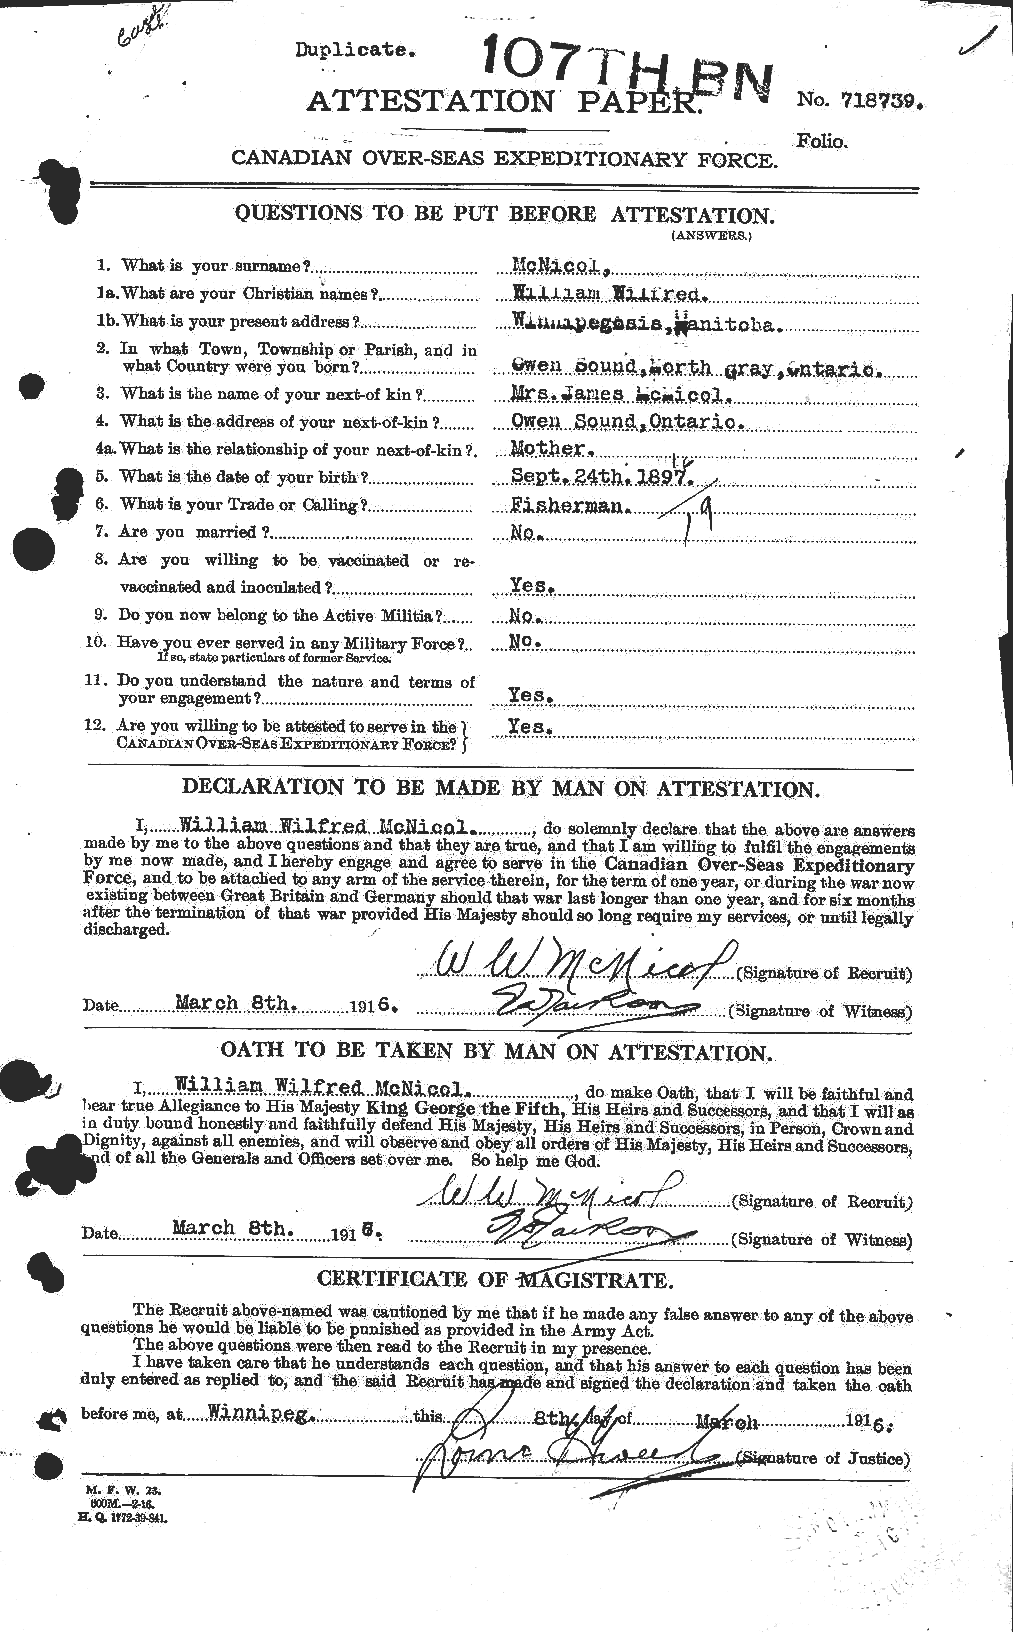 Personnel Records of the First World War - CEF 539227a